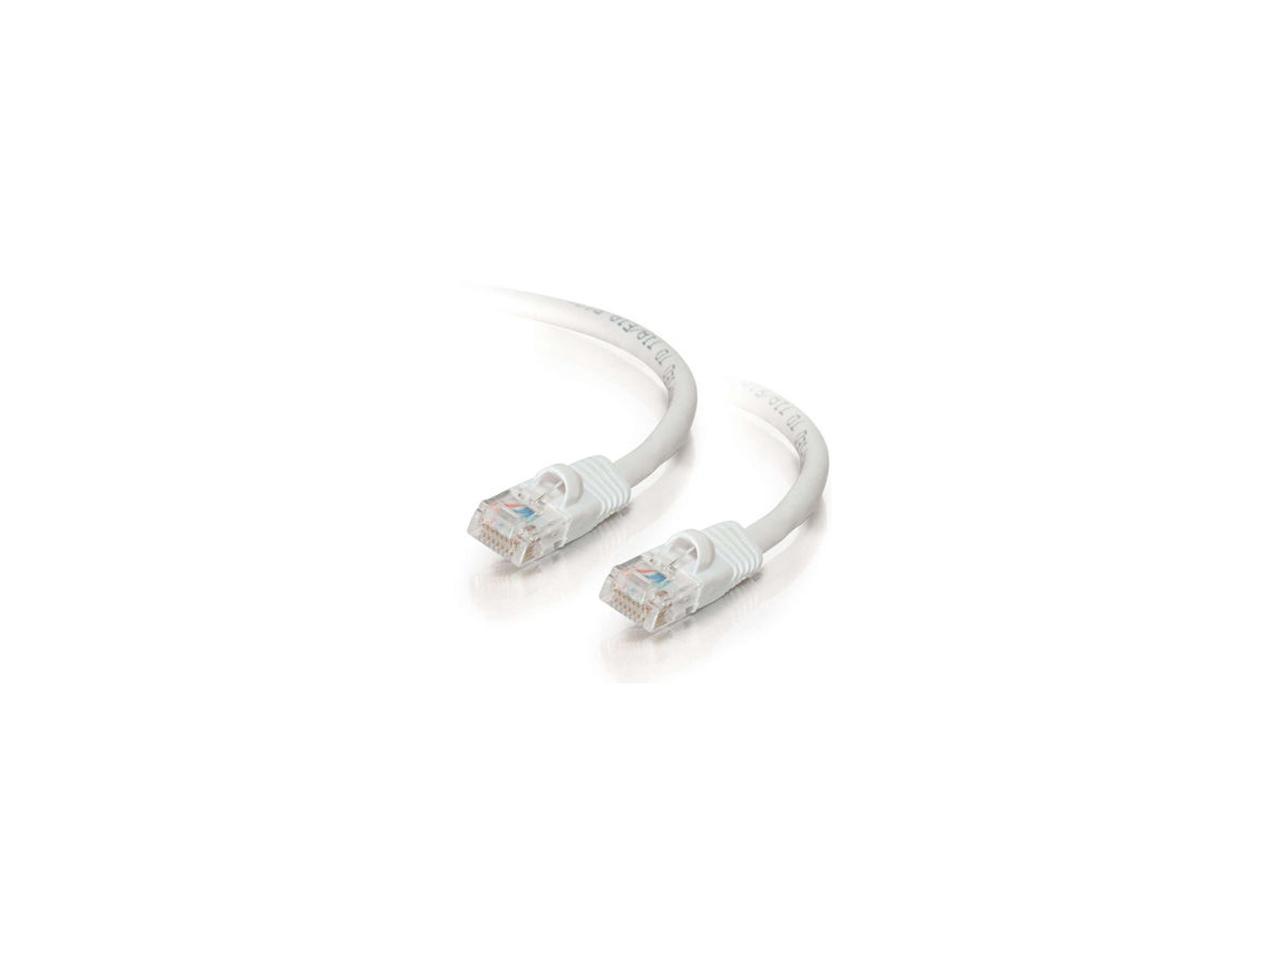 C2G 19478 Cat5e Cable - Snagless Unshielded Ethernet Network Patch Cable, White (7 Feet, 2.13 Meters)